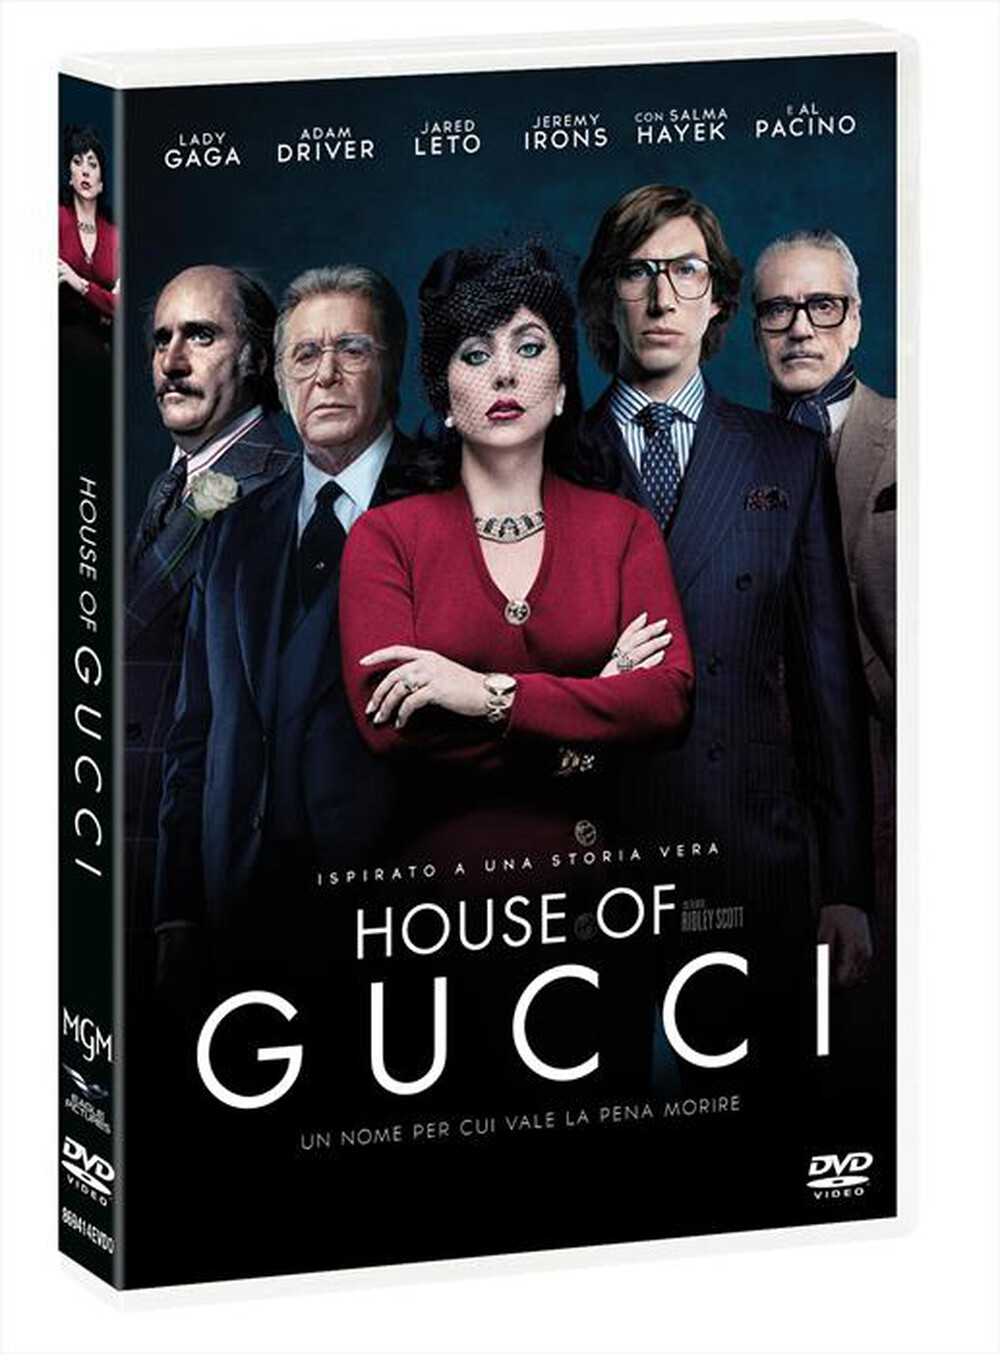 "EAGLE PICTURES - House Of Gucci (Dvd+Block Notes)"